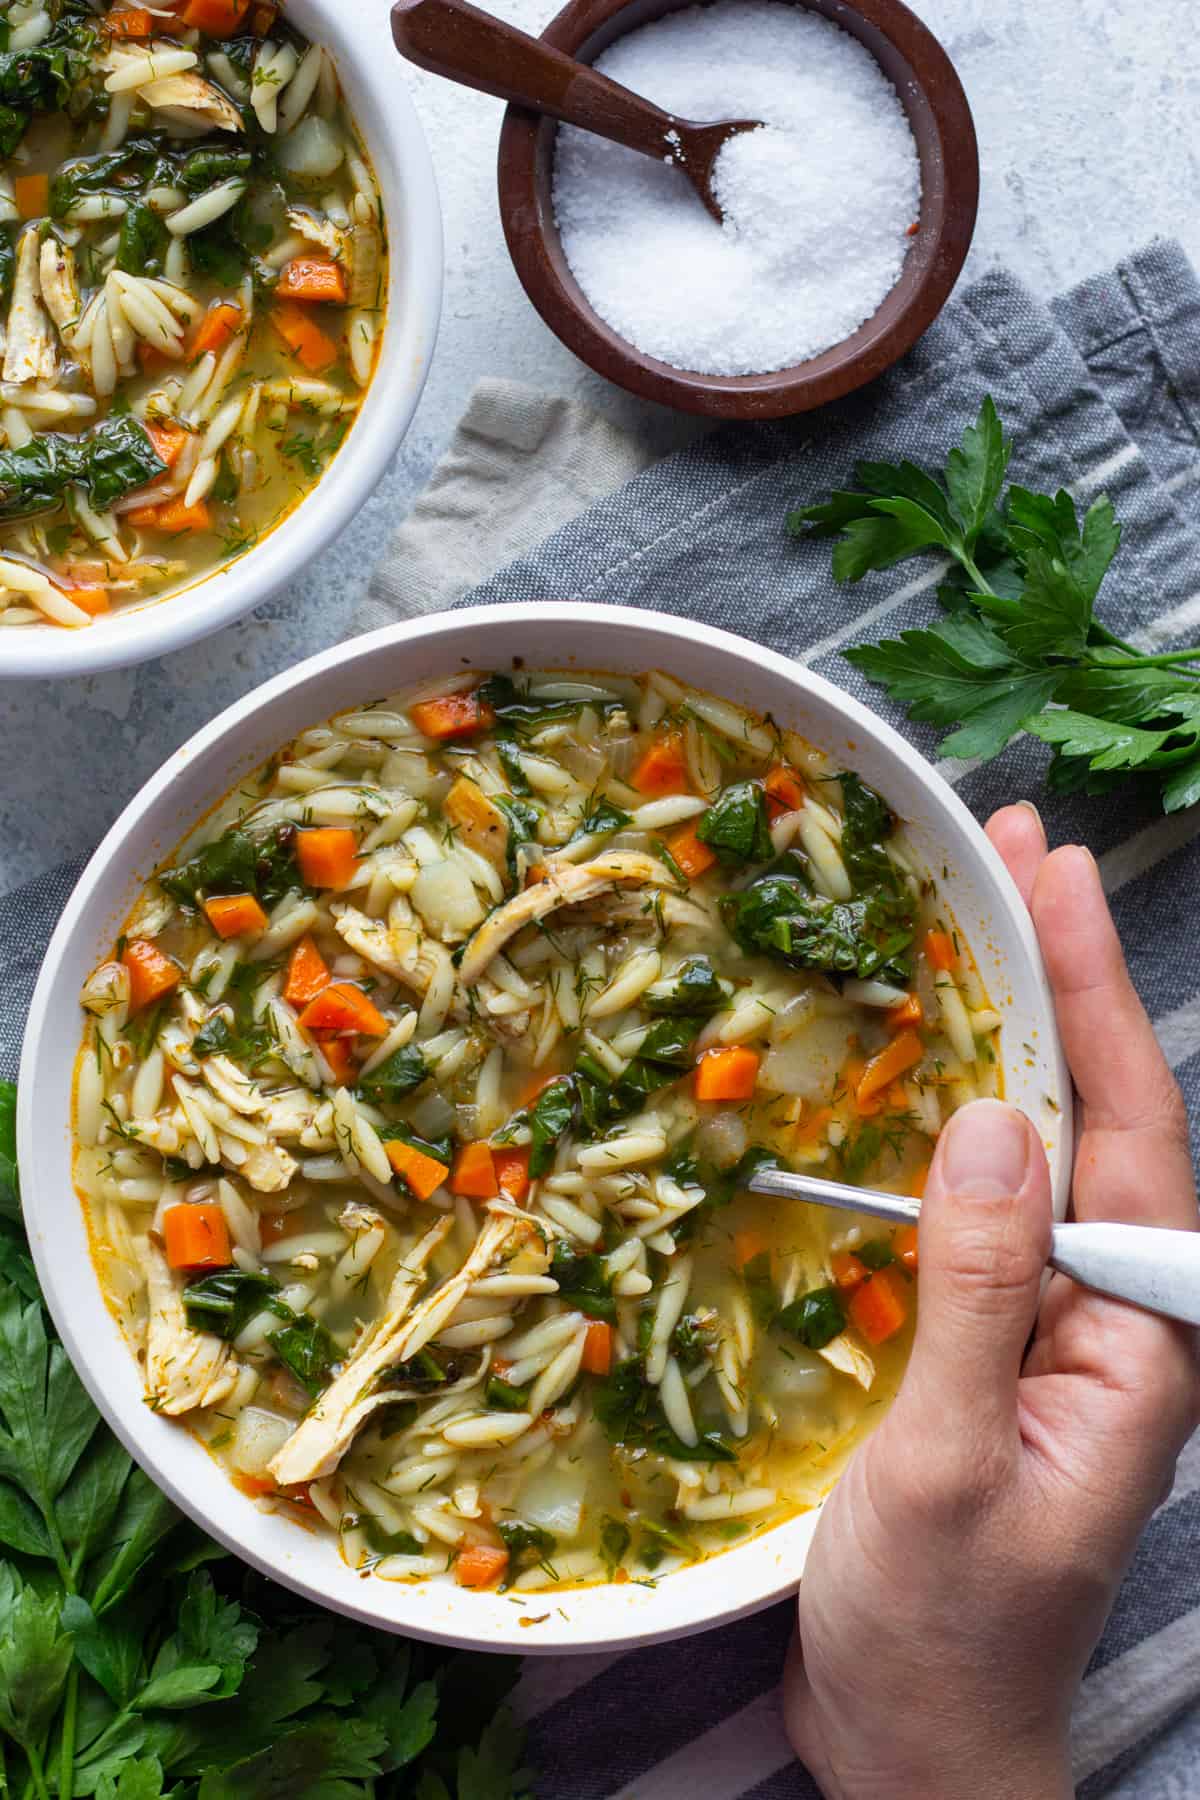 easy healthy dinner ideas - Greek lemon chicken orzo soup is easy and packed with flavor. This healthy soup is creamy, hearty and so tasty, perfect for a cozy dinner.